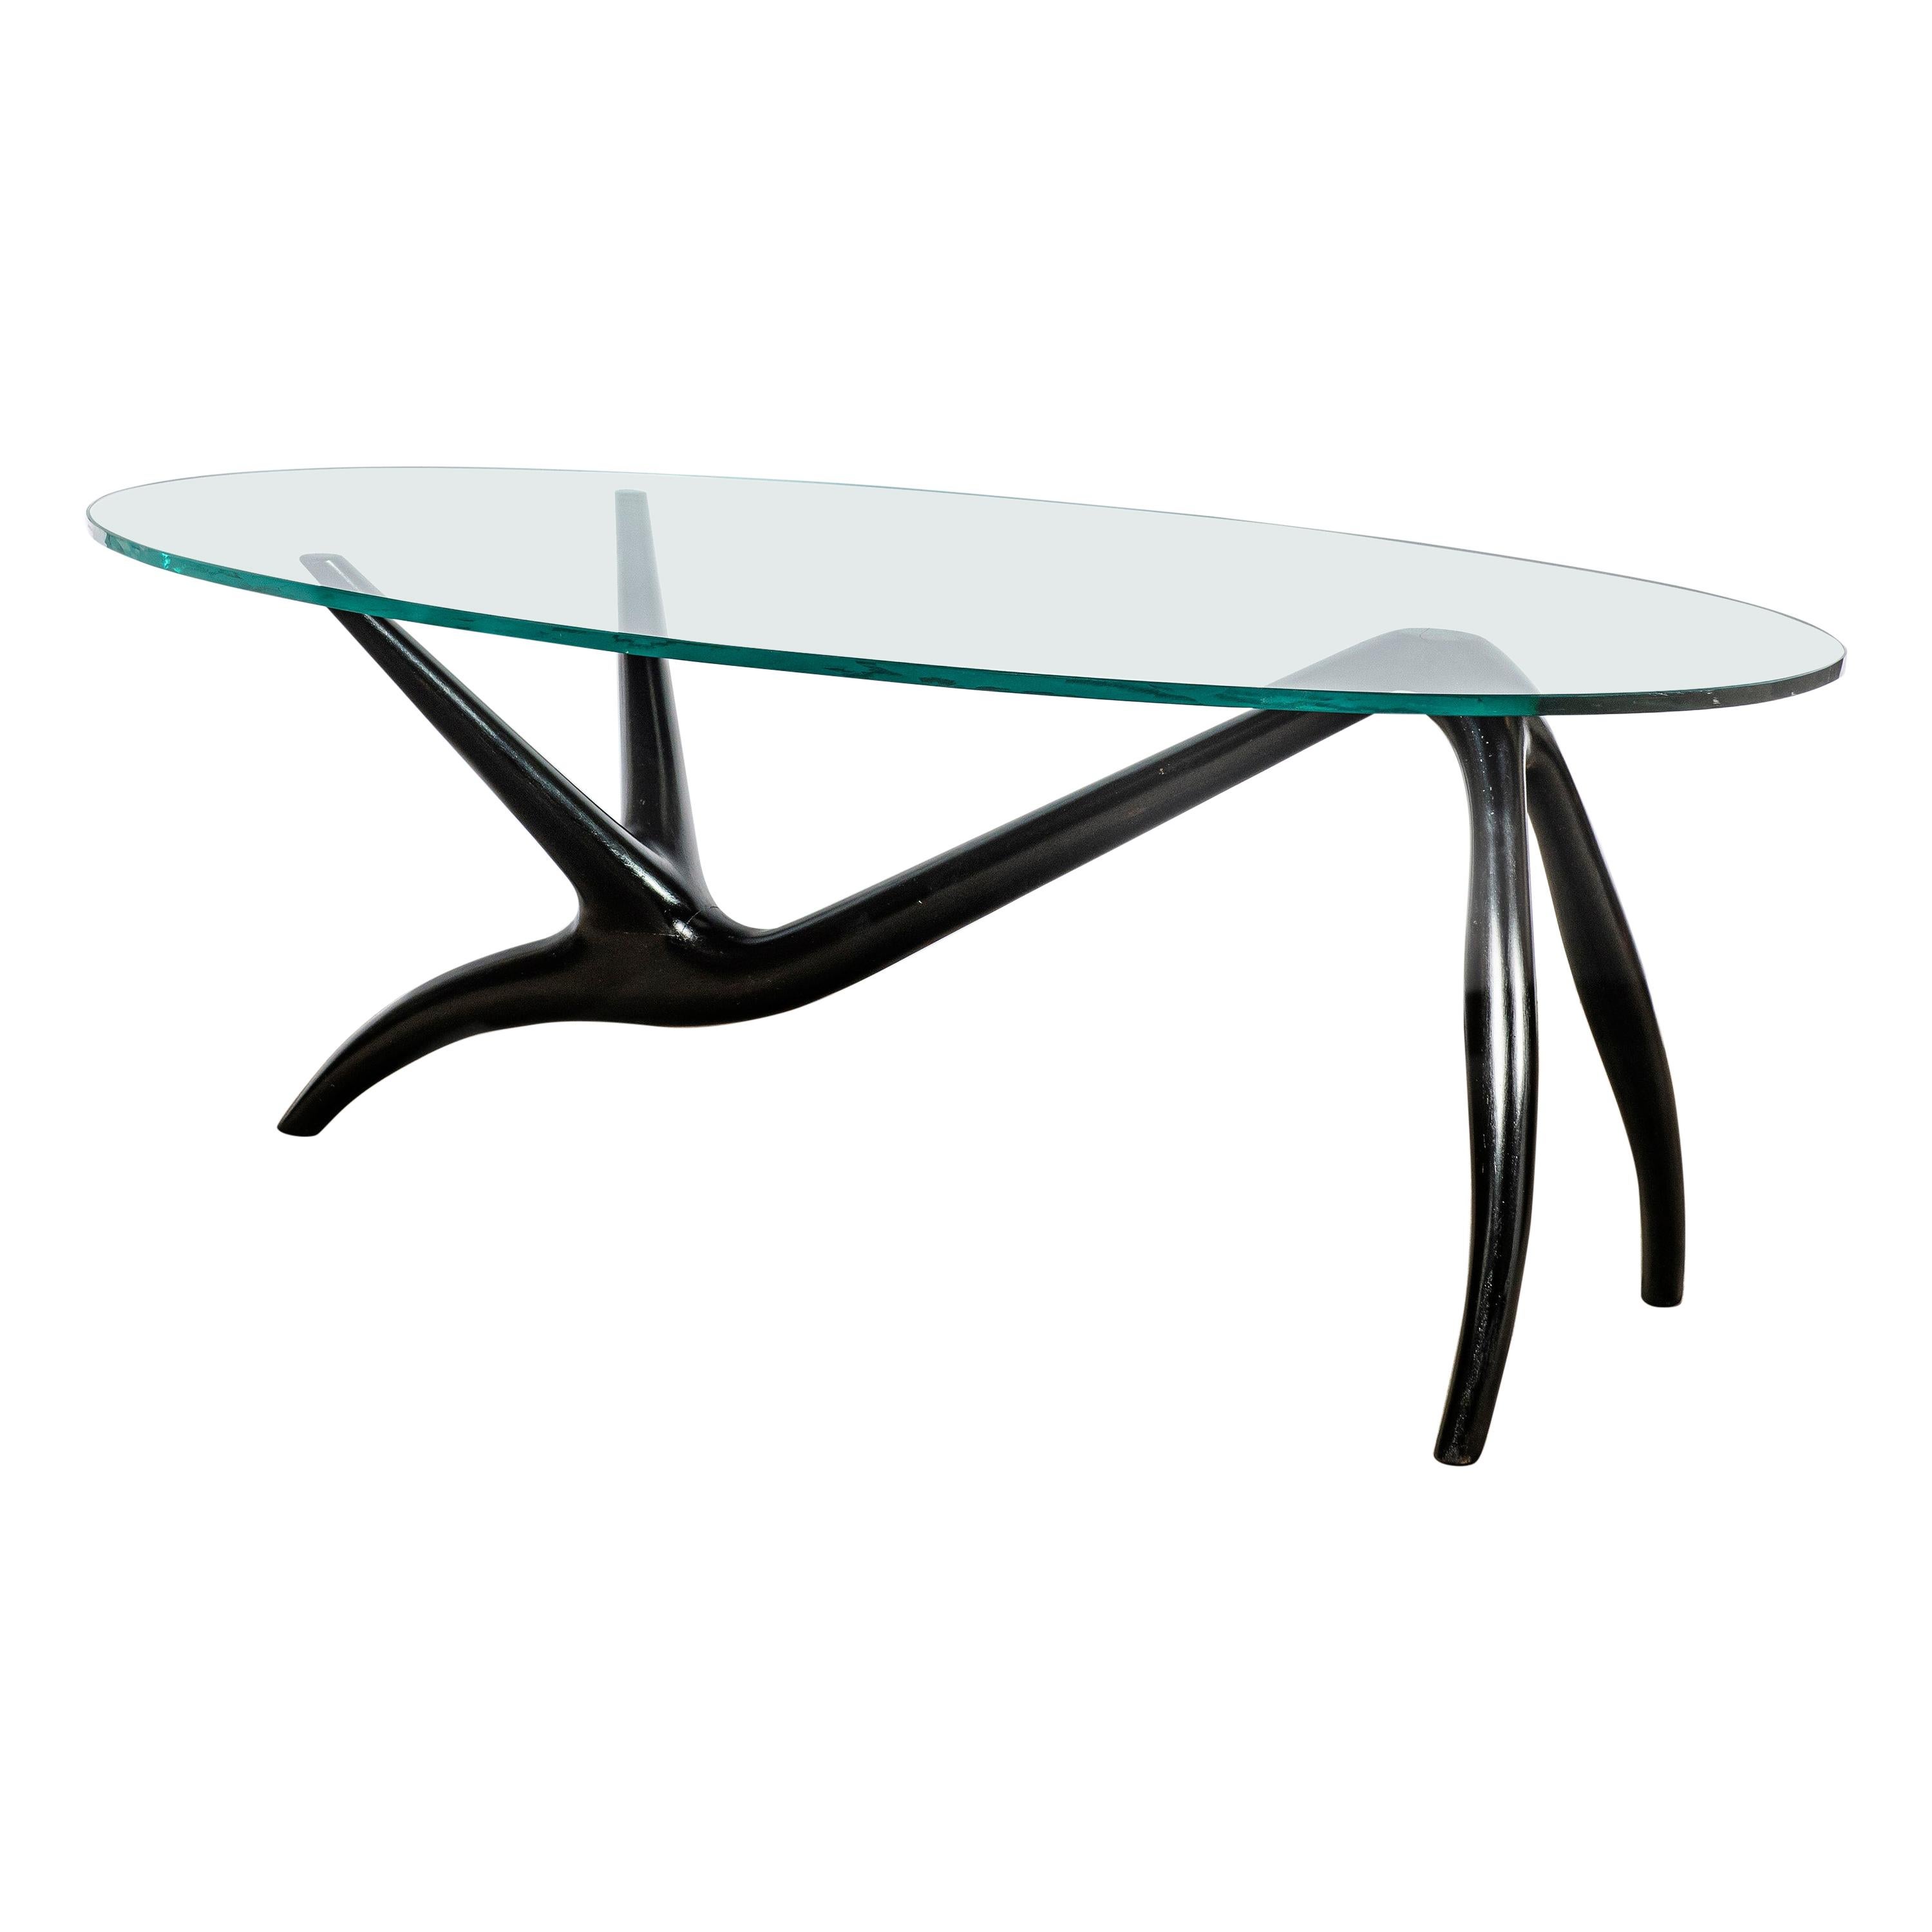 Painted Wood and Glass Low Table by Englander & Bonta, Argentina, circa 1950